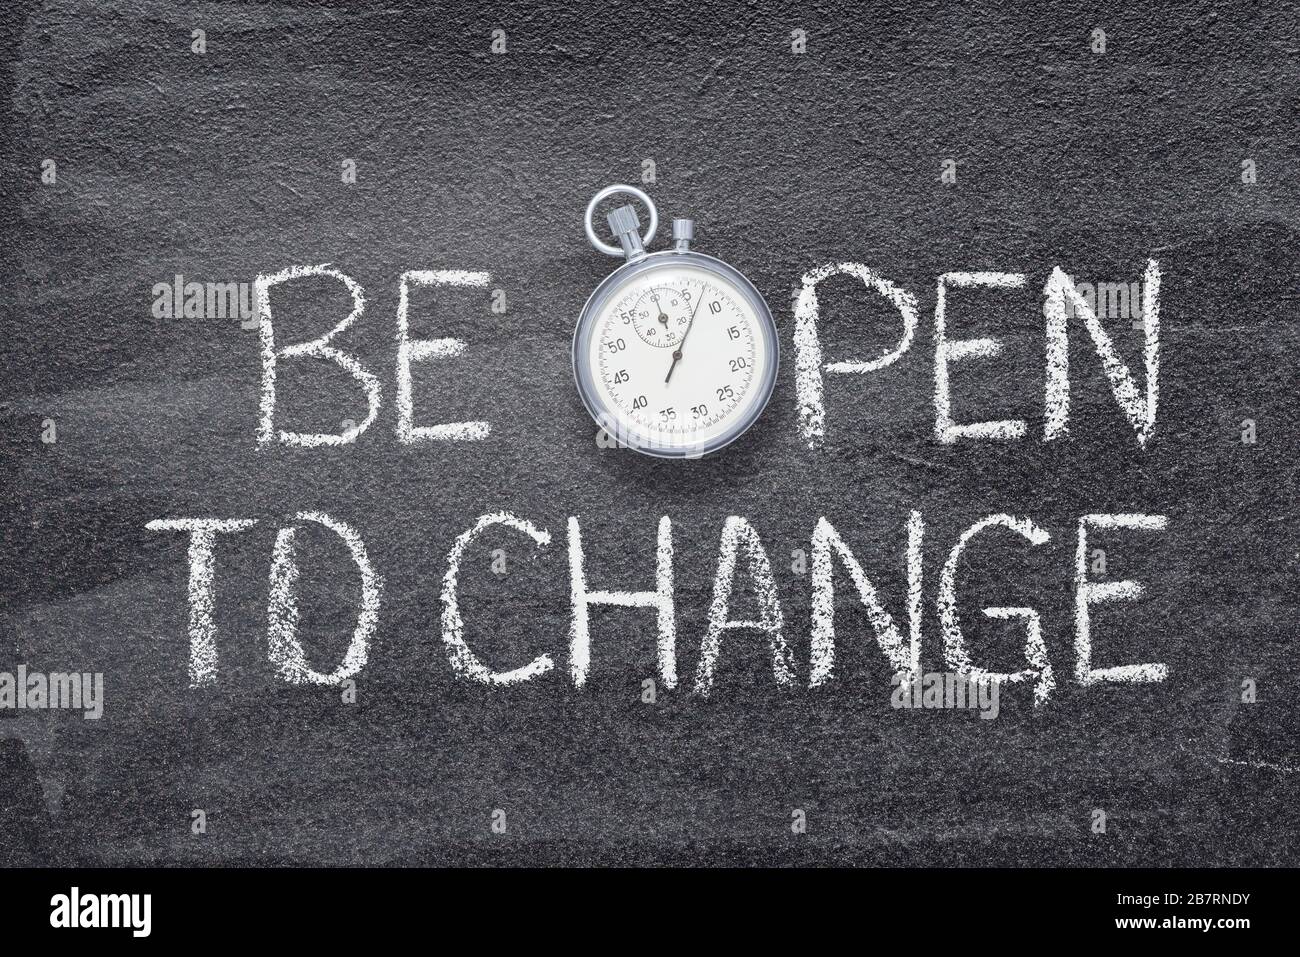 be open to change phrase written on chalkboard with vintage precise stopwatch Stock Photo